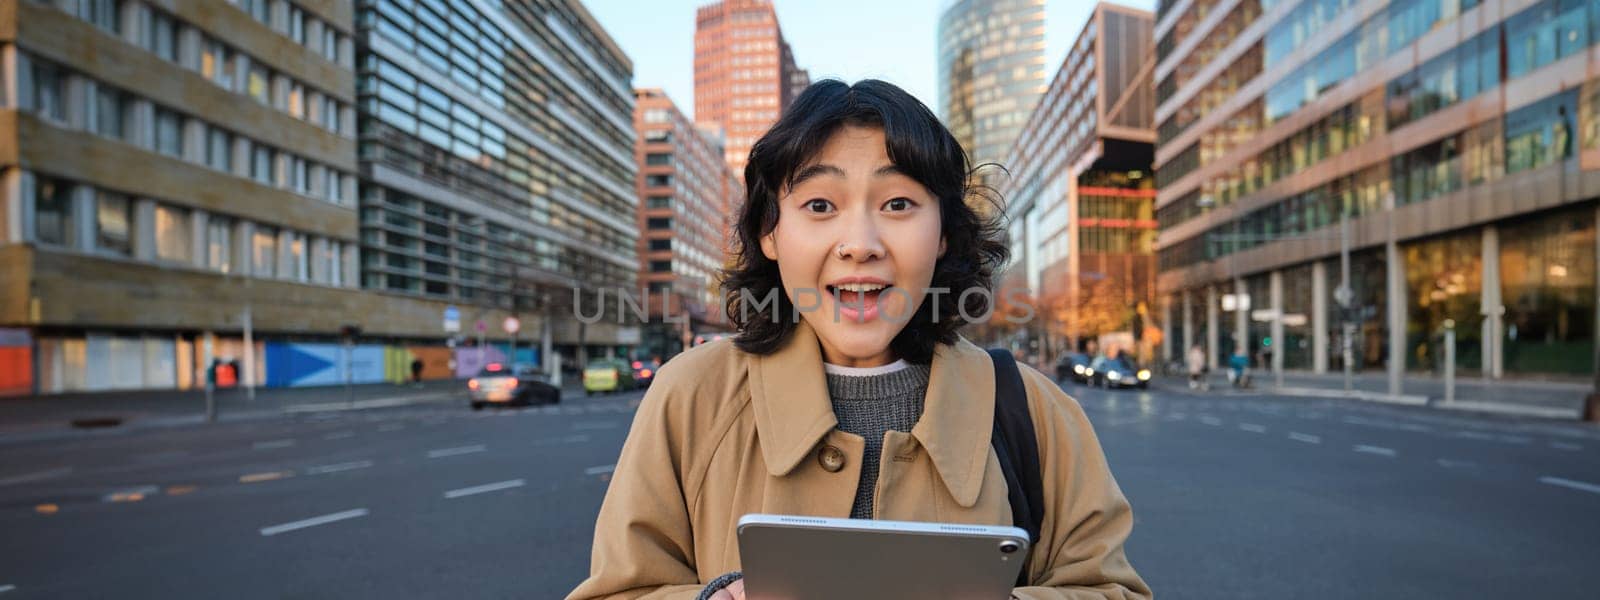 Portrait of korean girl looks surprised, found out something amazing, holding digital tablet with joyful face, stands on street of city centre.